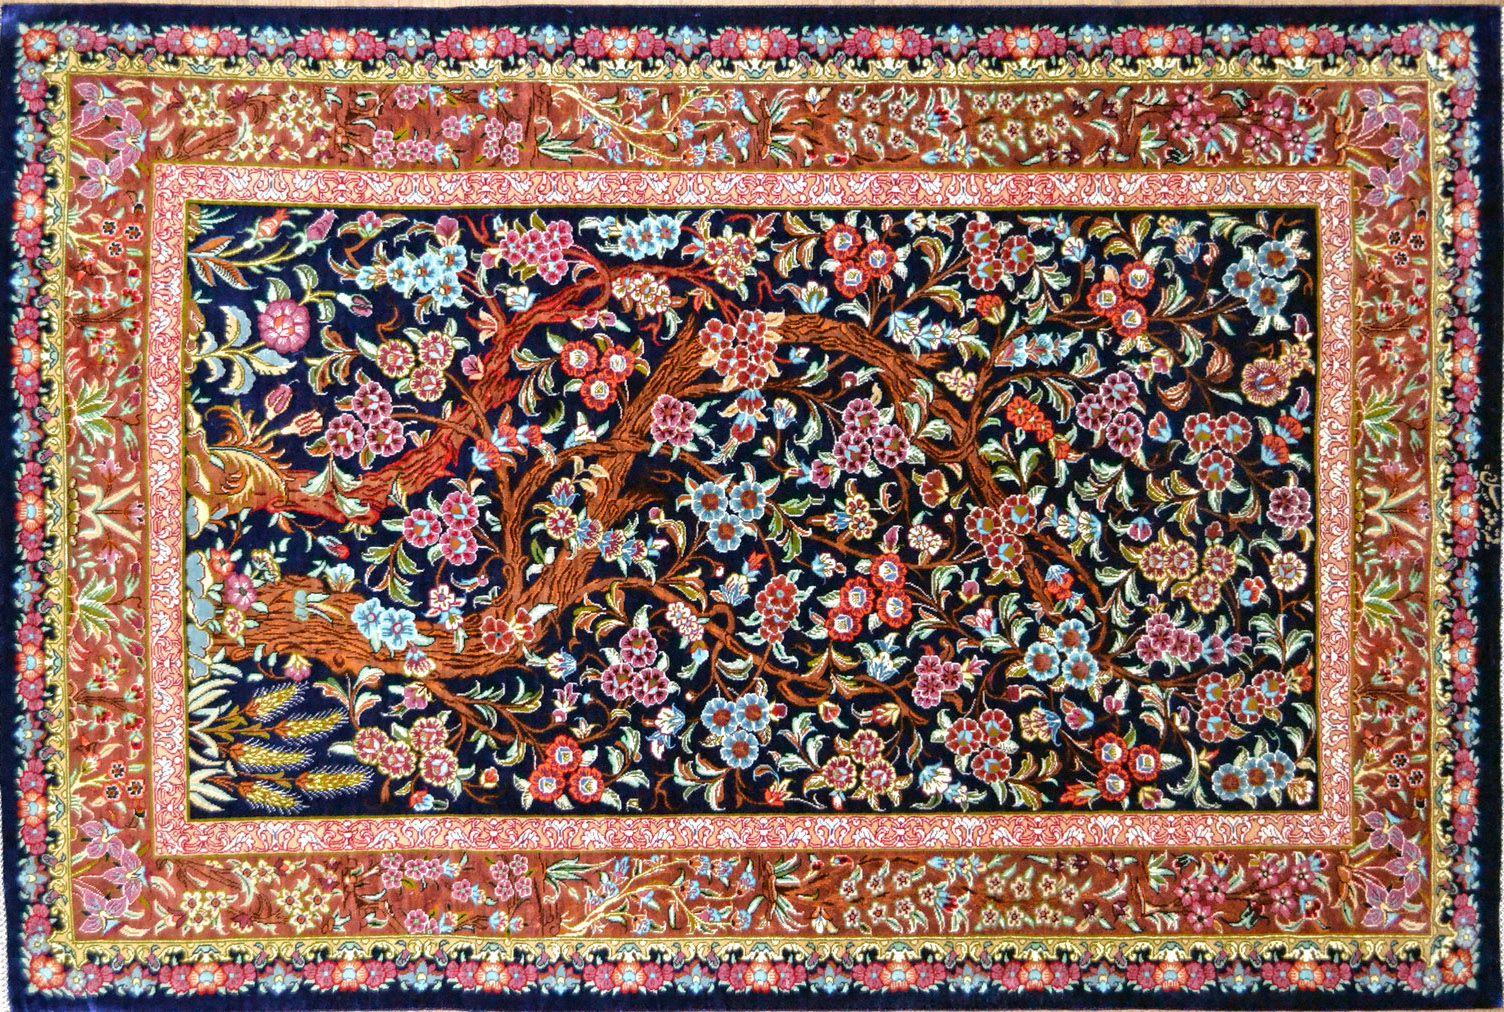 iranian rugs on display in cologne intu0027l interiors show EMQDFKR